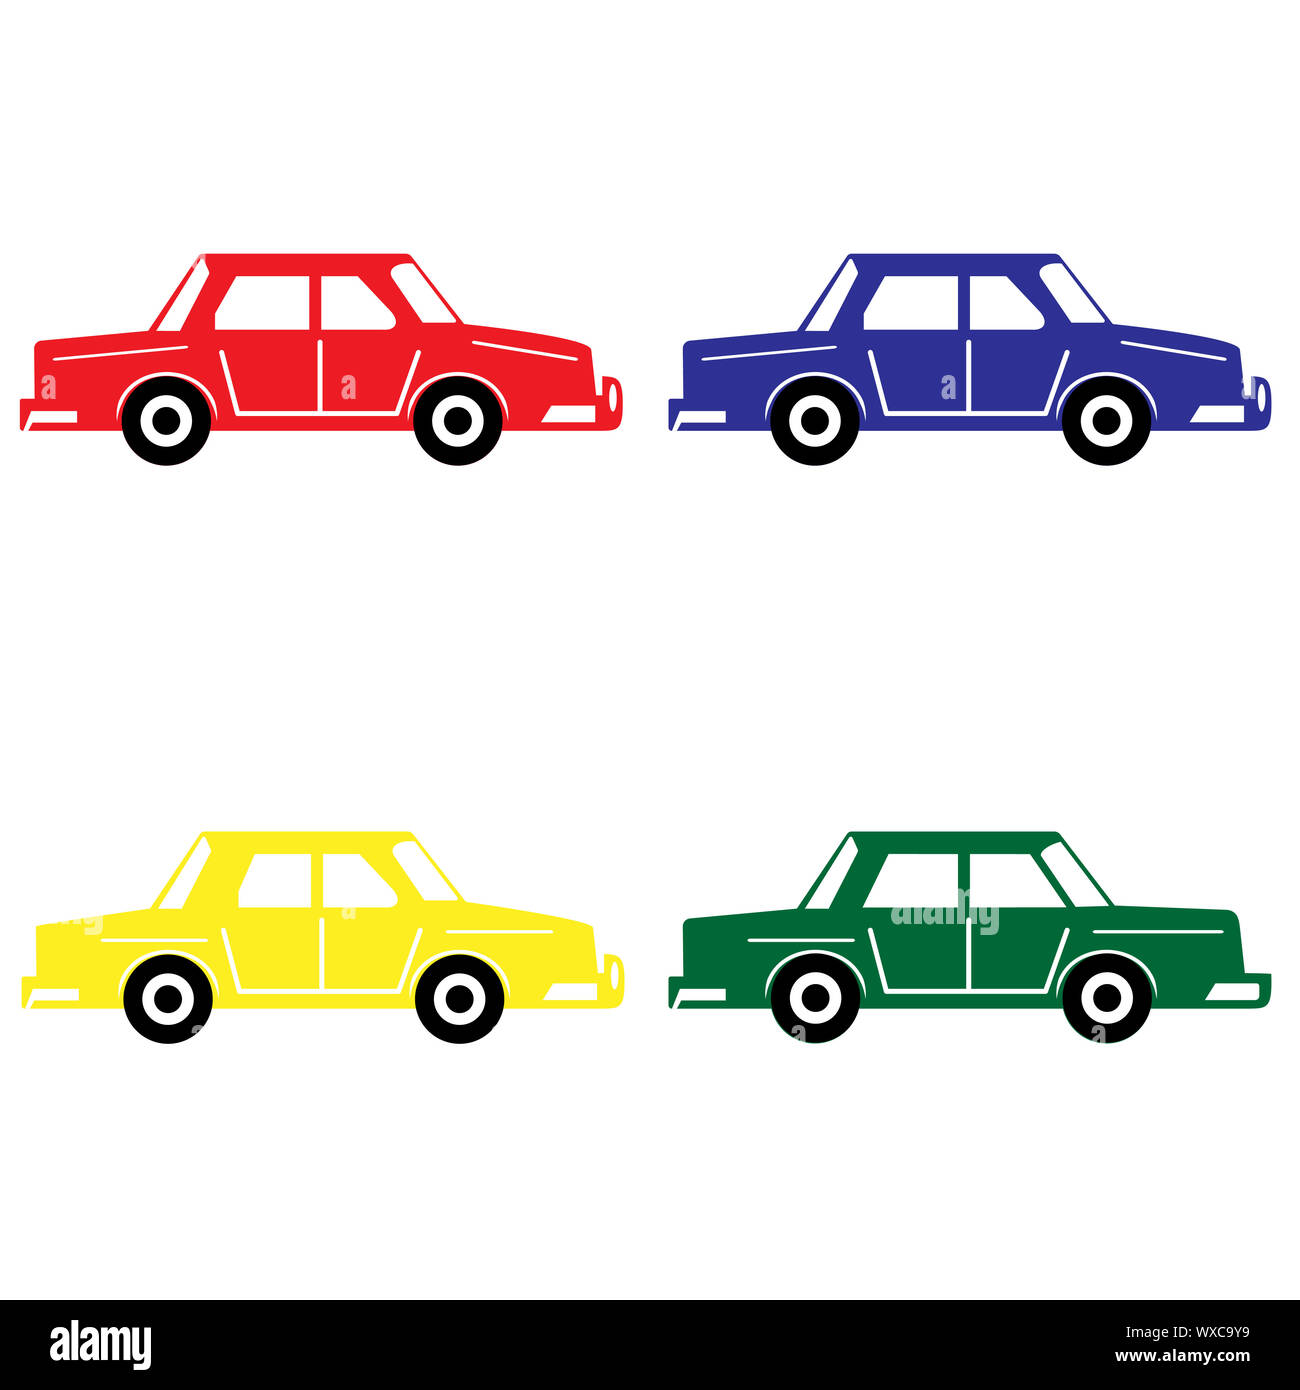 Set of 4 colorful cars Stock Photo